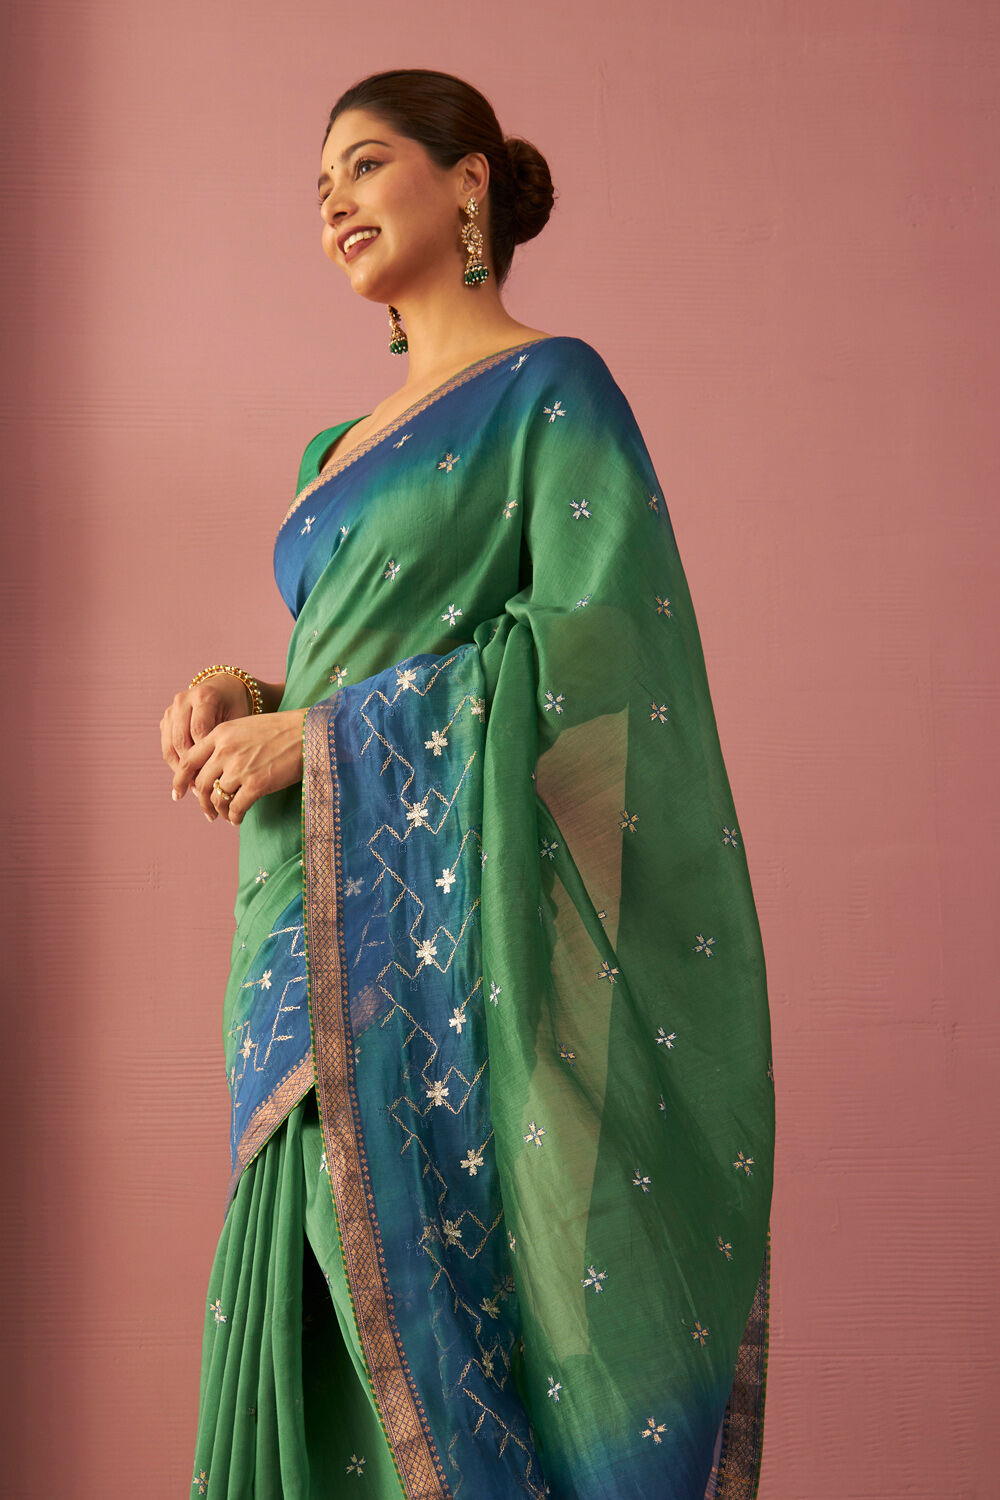 7 New Saree Designs For 2023 To Unleash Your Inner Diva